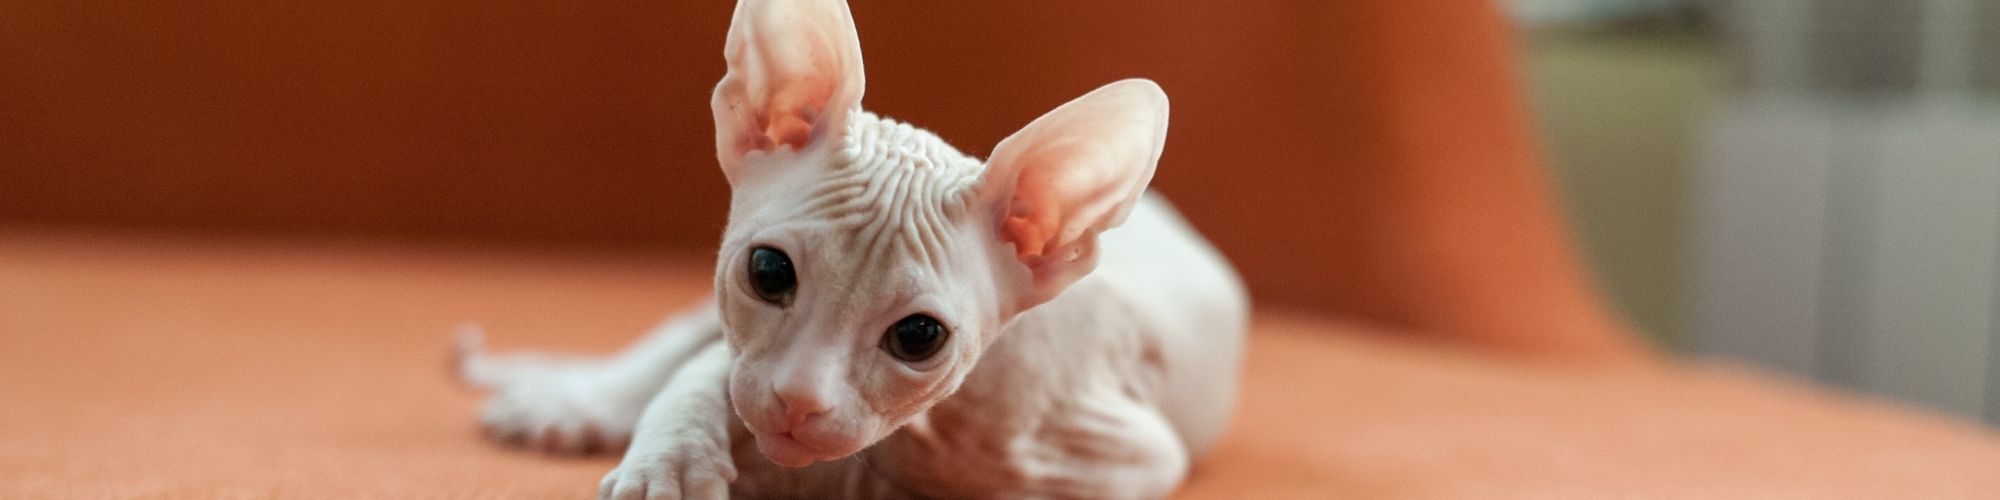 Sphynx Cat Care: How to Bathe a Hairless Cat